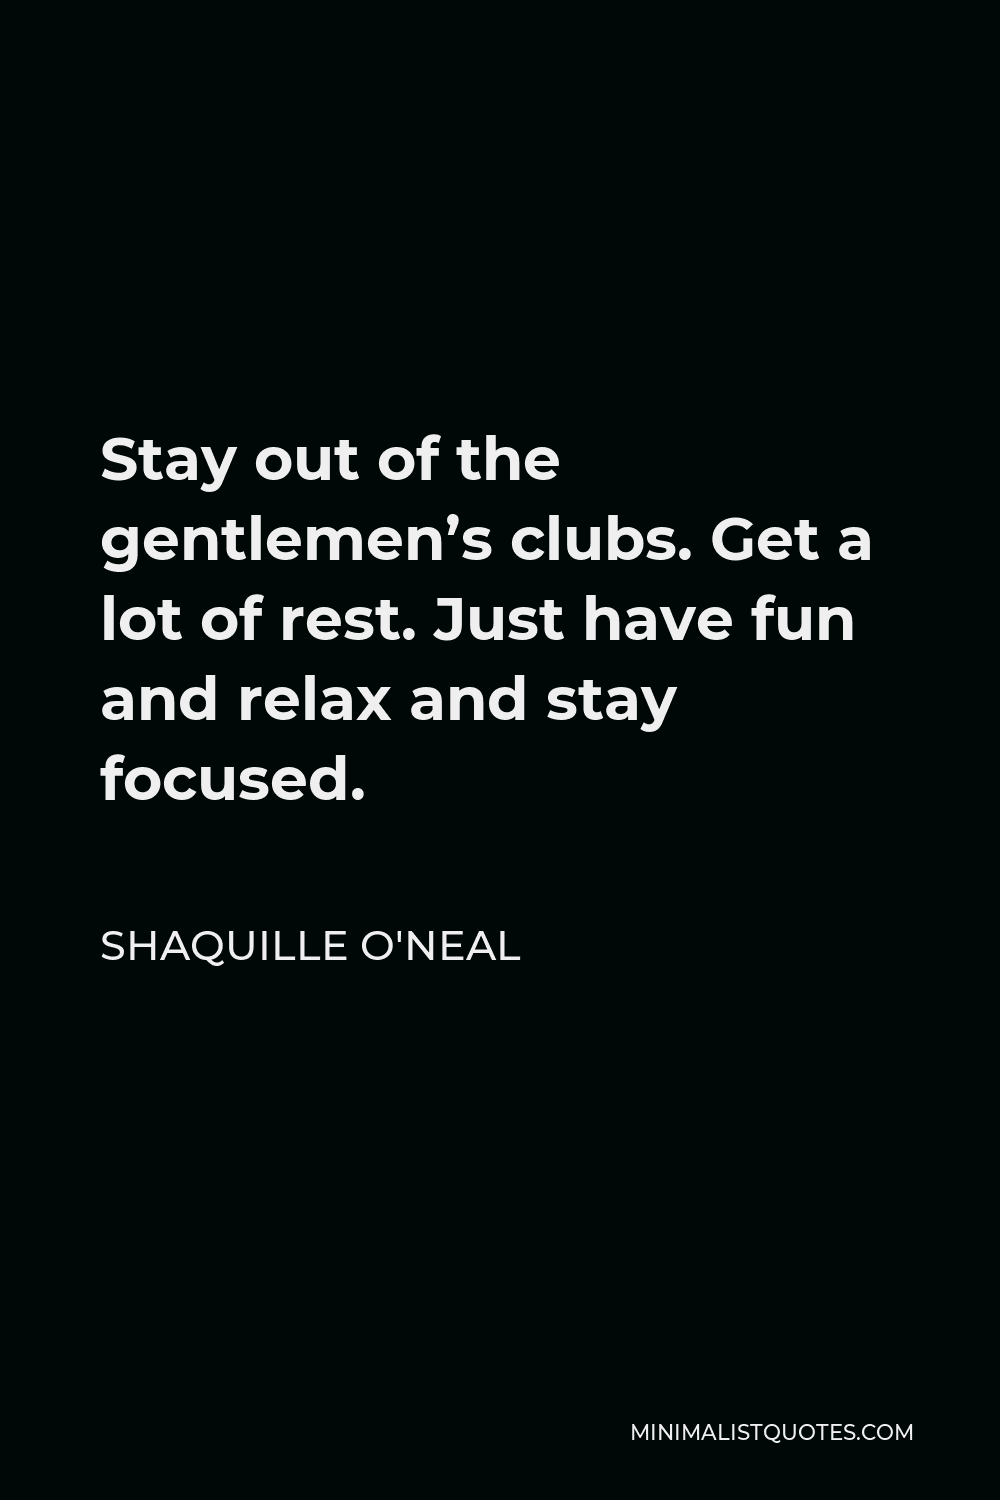 Shaquille O'Neal Quote - Stay out of the gentlemen’s clubs. Get a lot of rest. Just have fun and relax and stay focused.